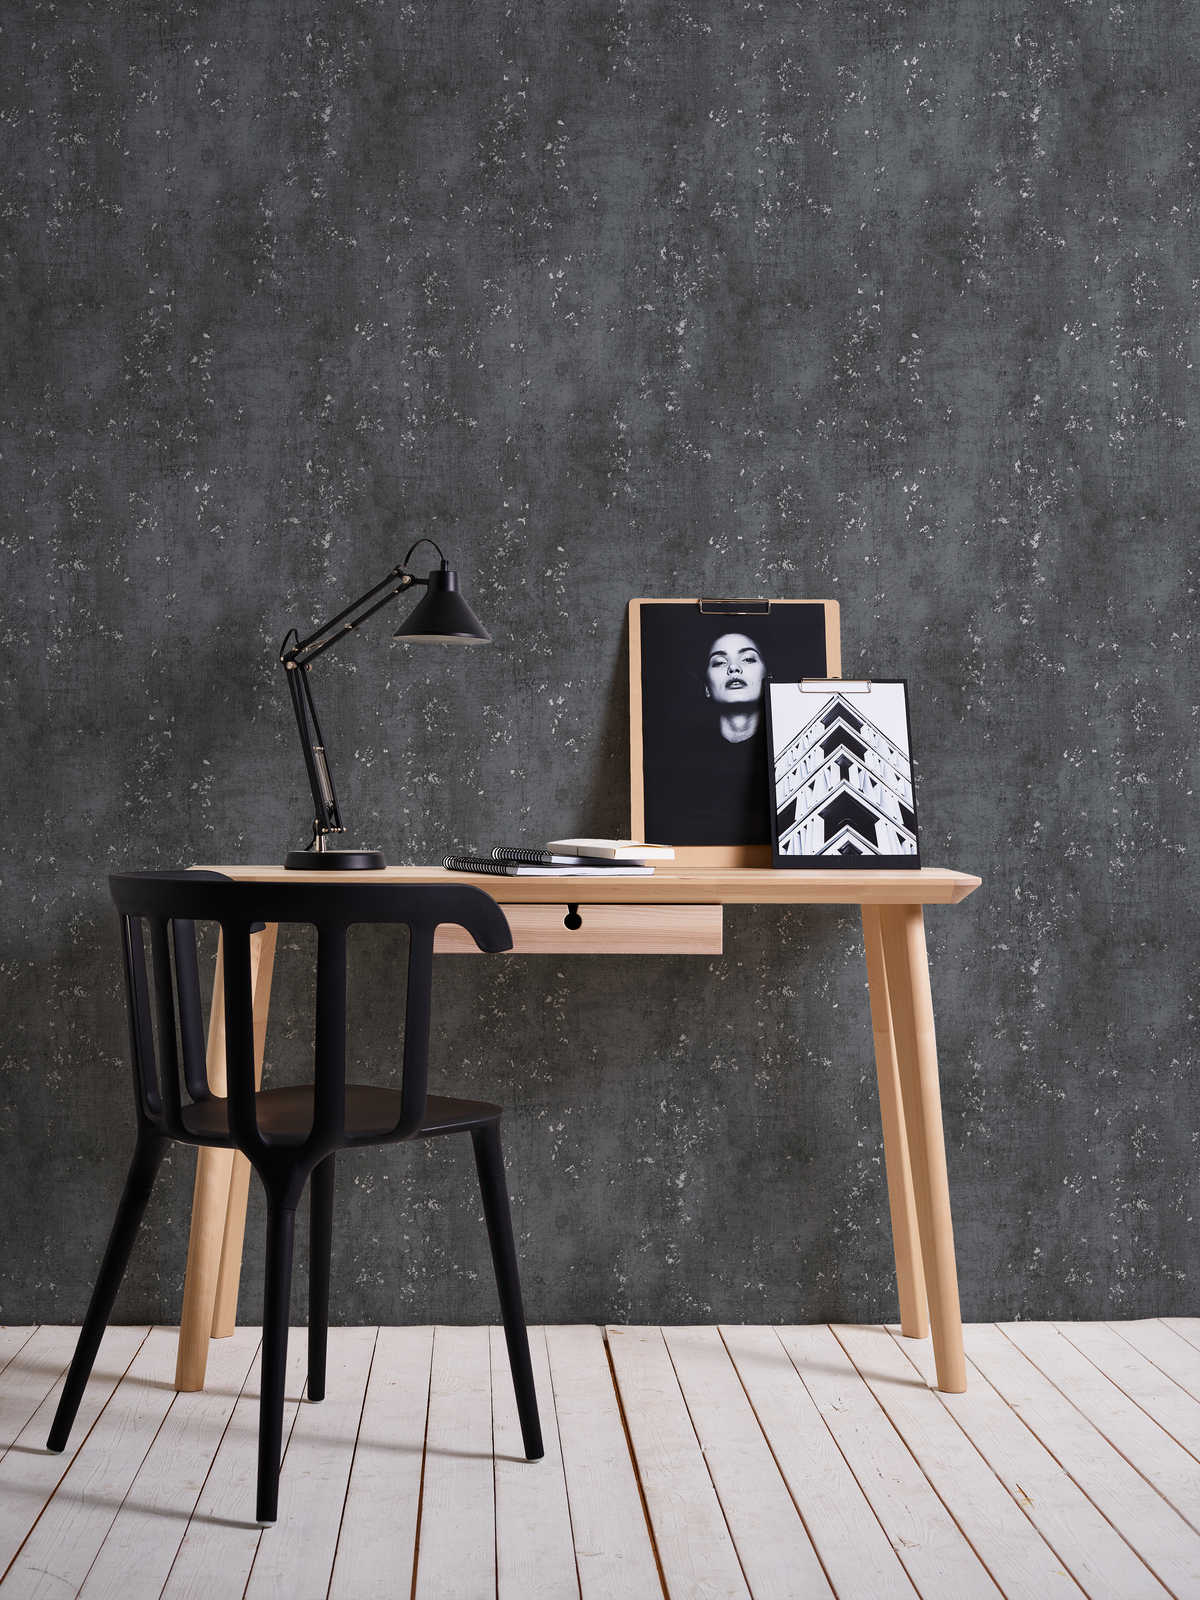             Anthracite wallpaper plaster look with silver crackle - grey, metallic, black
        